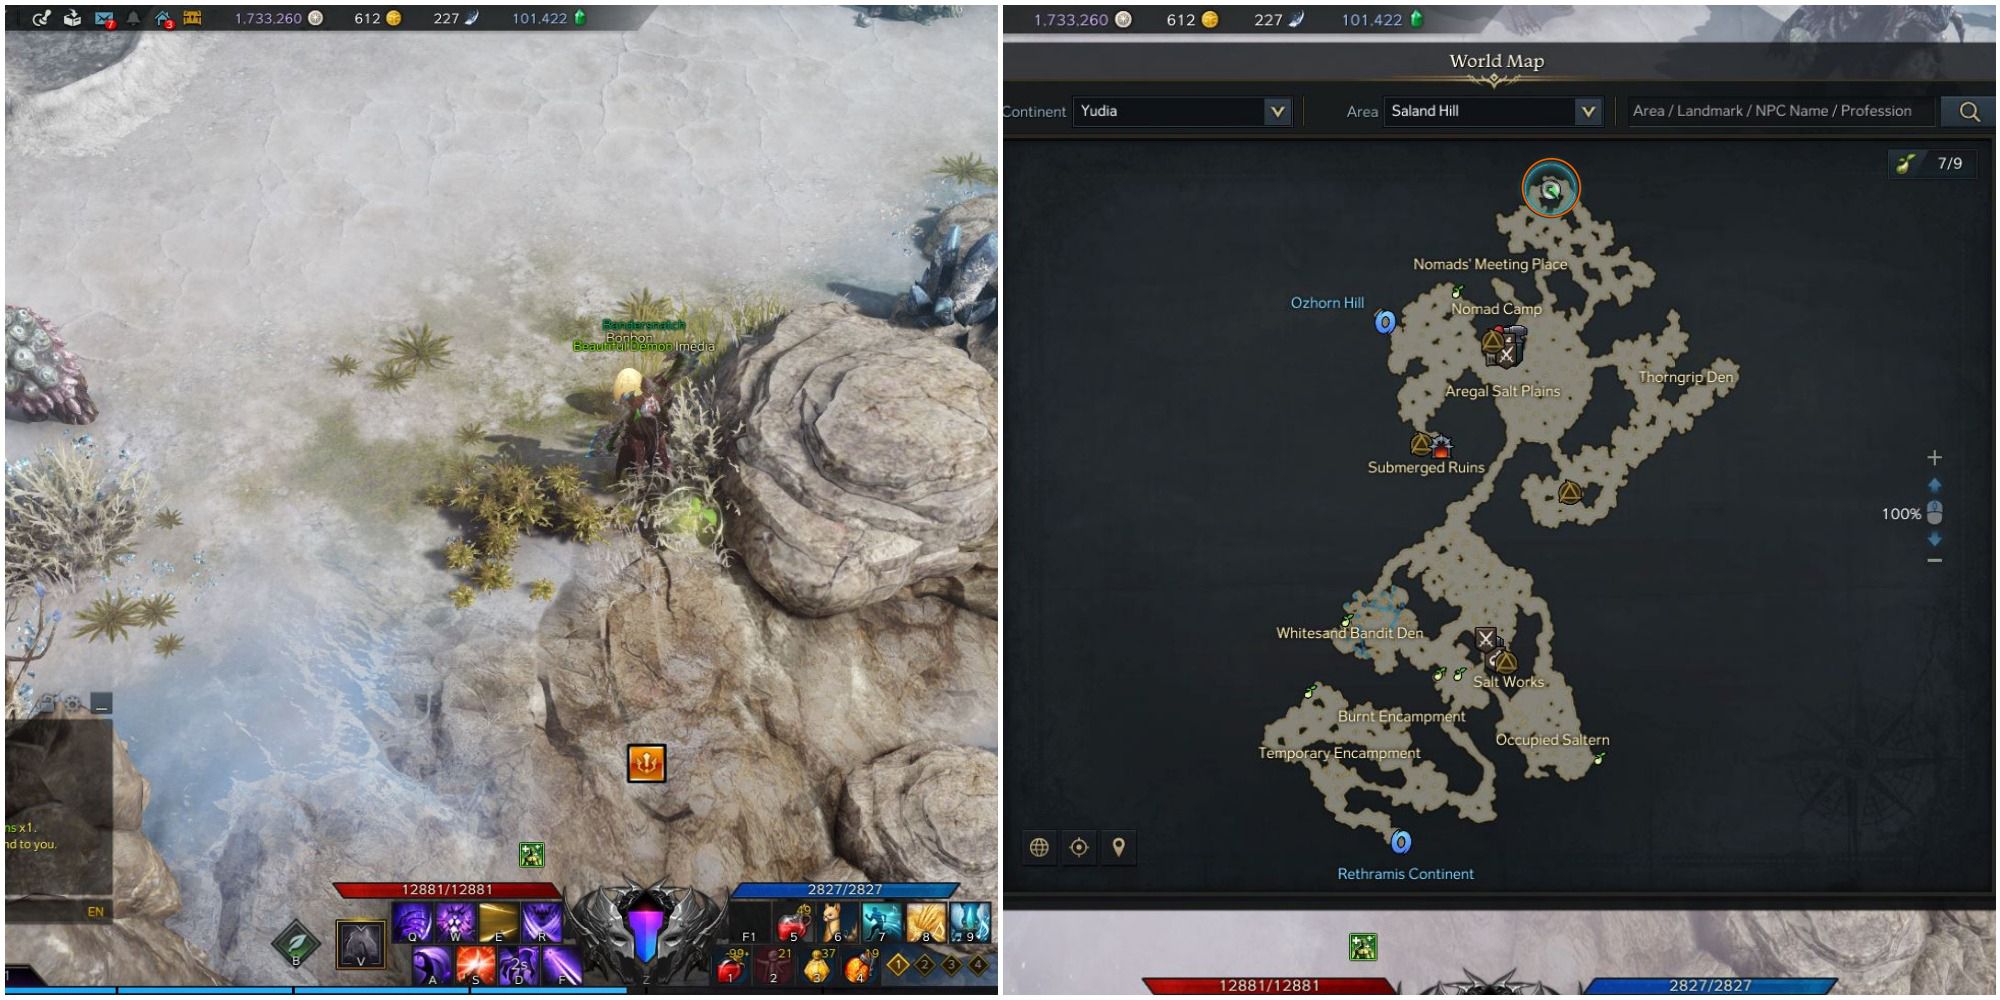 A split image of a player beside a mokoko seed in aregal salt plains and a map of Saland Hill